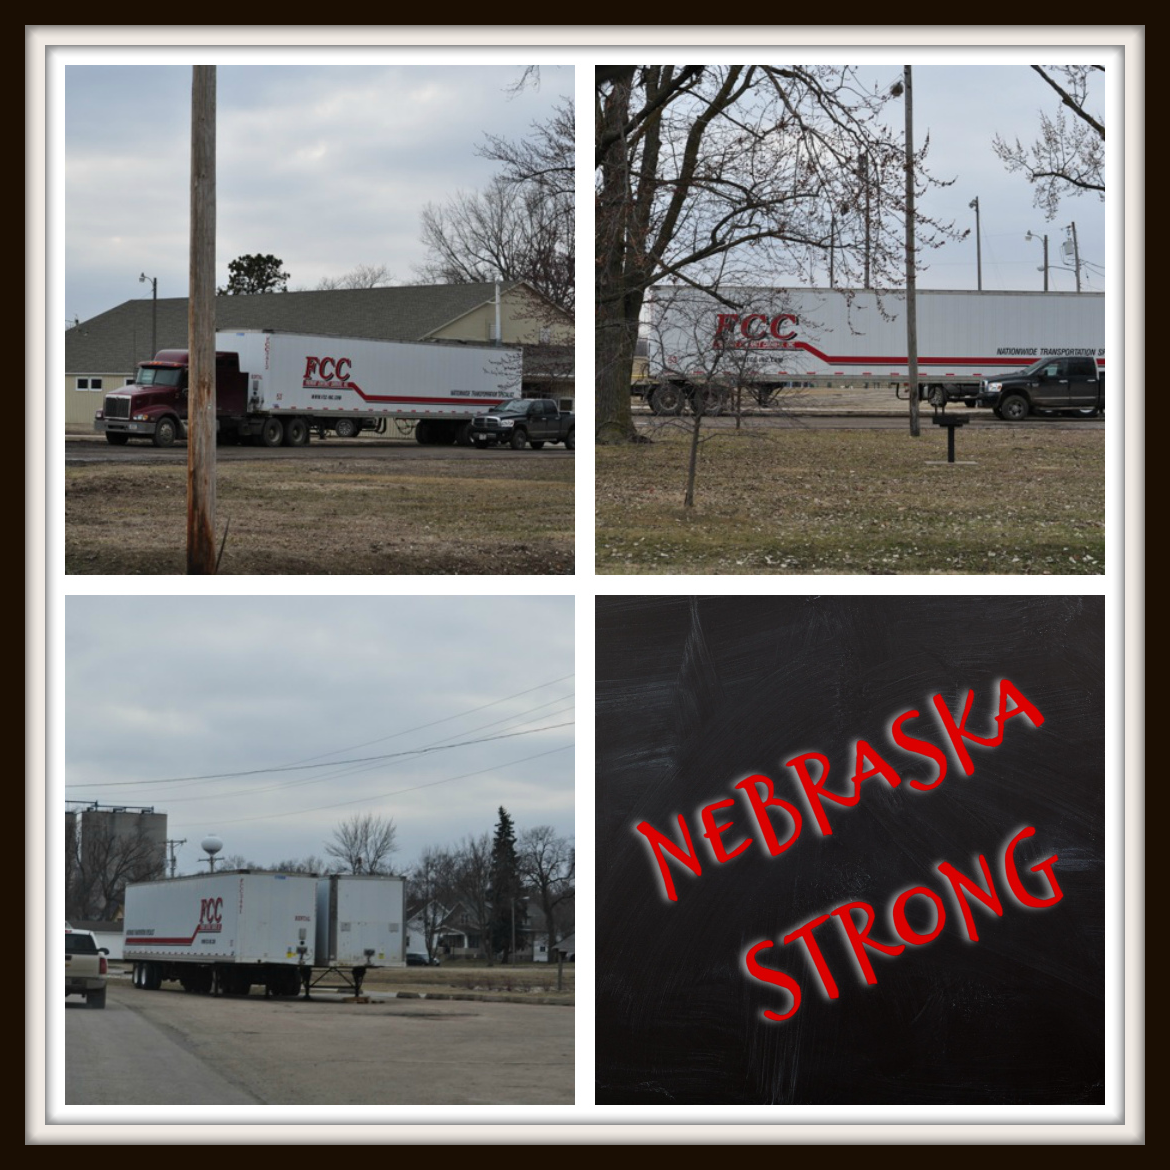 Fremont Contract Carriers provides flood relief in Nebraska.